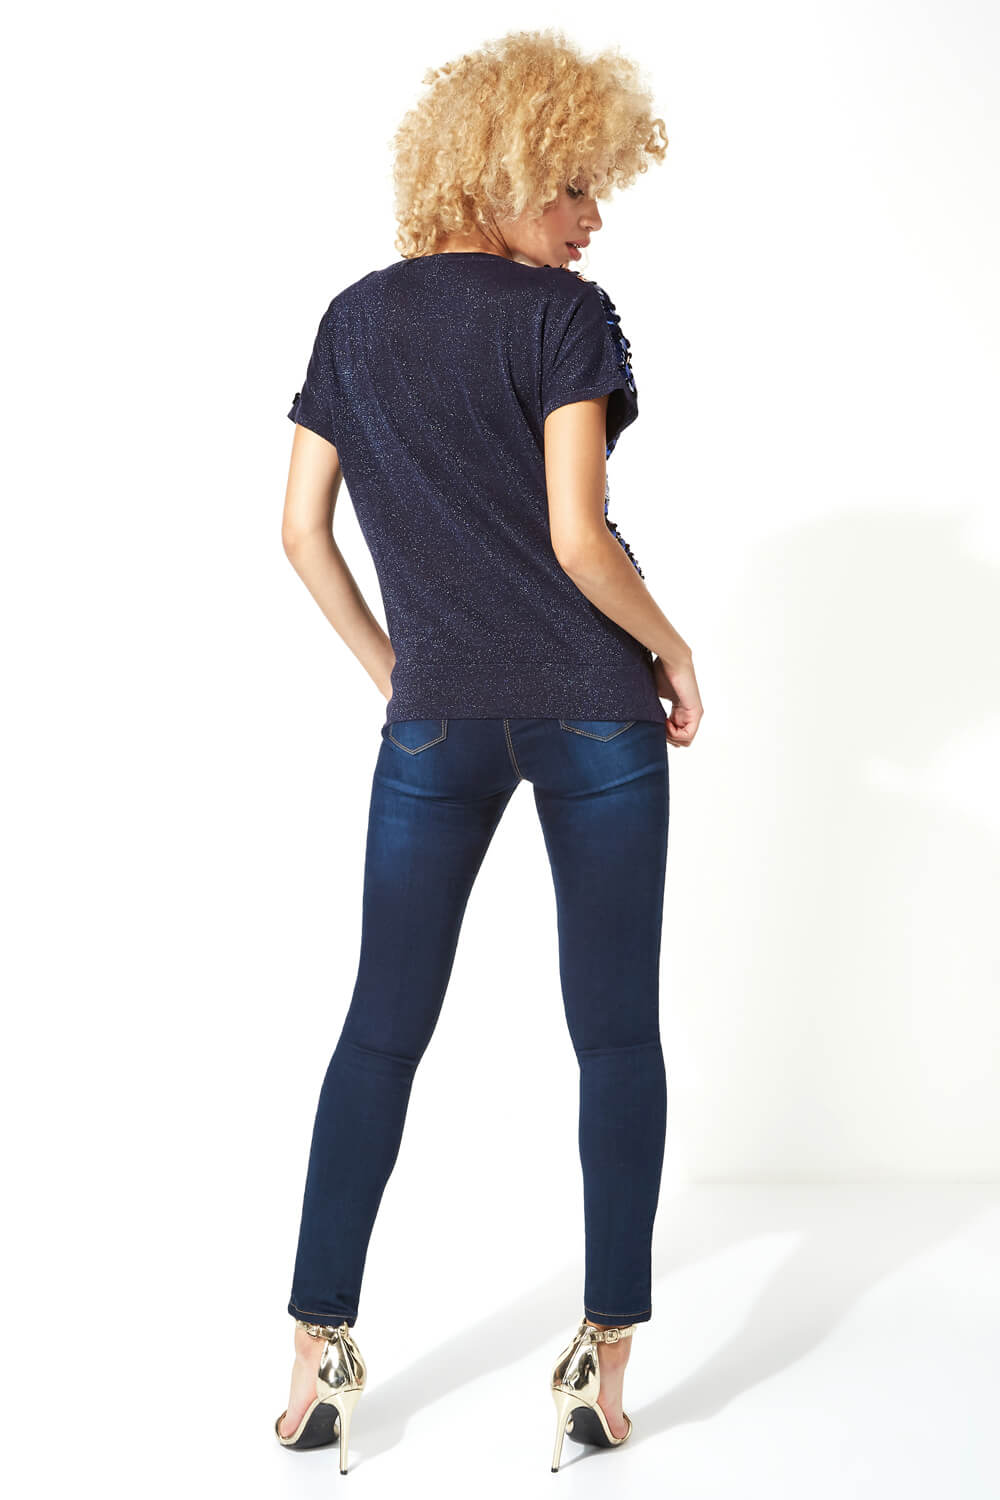 Midnight Blue Sequin Front Knit Blouson Top, Image 3 of 5